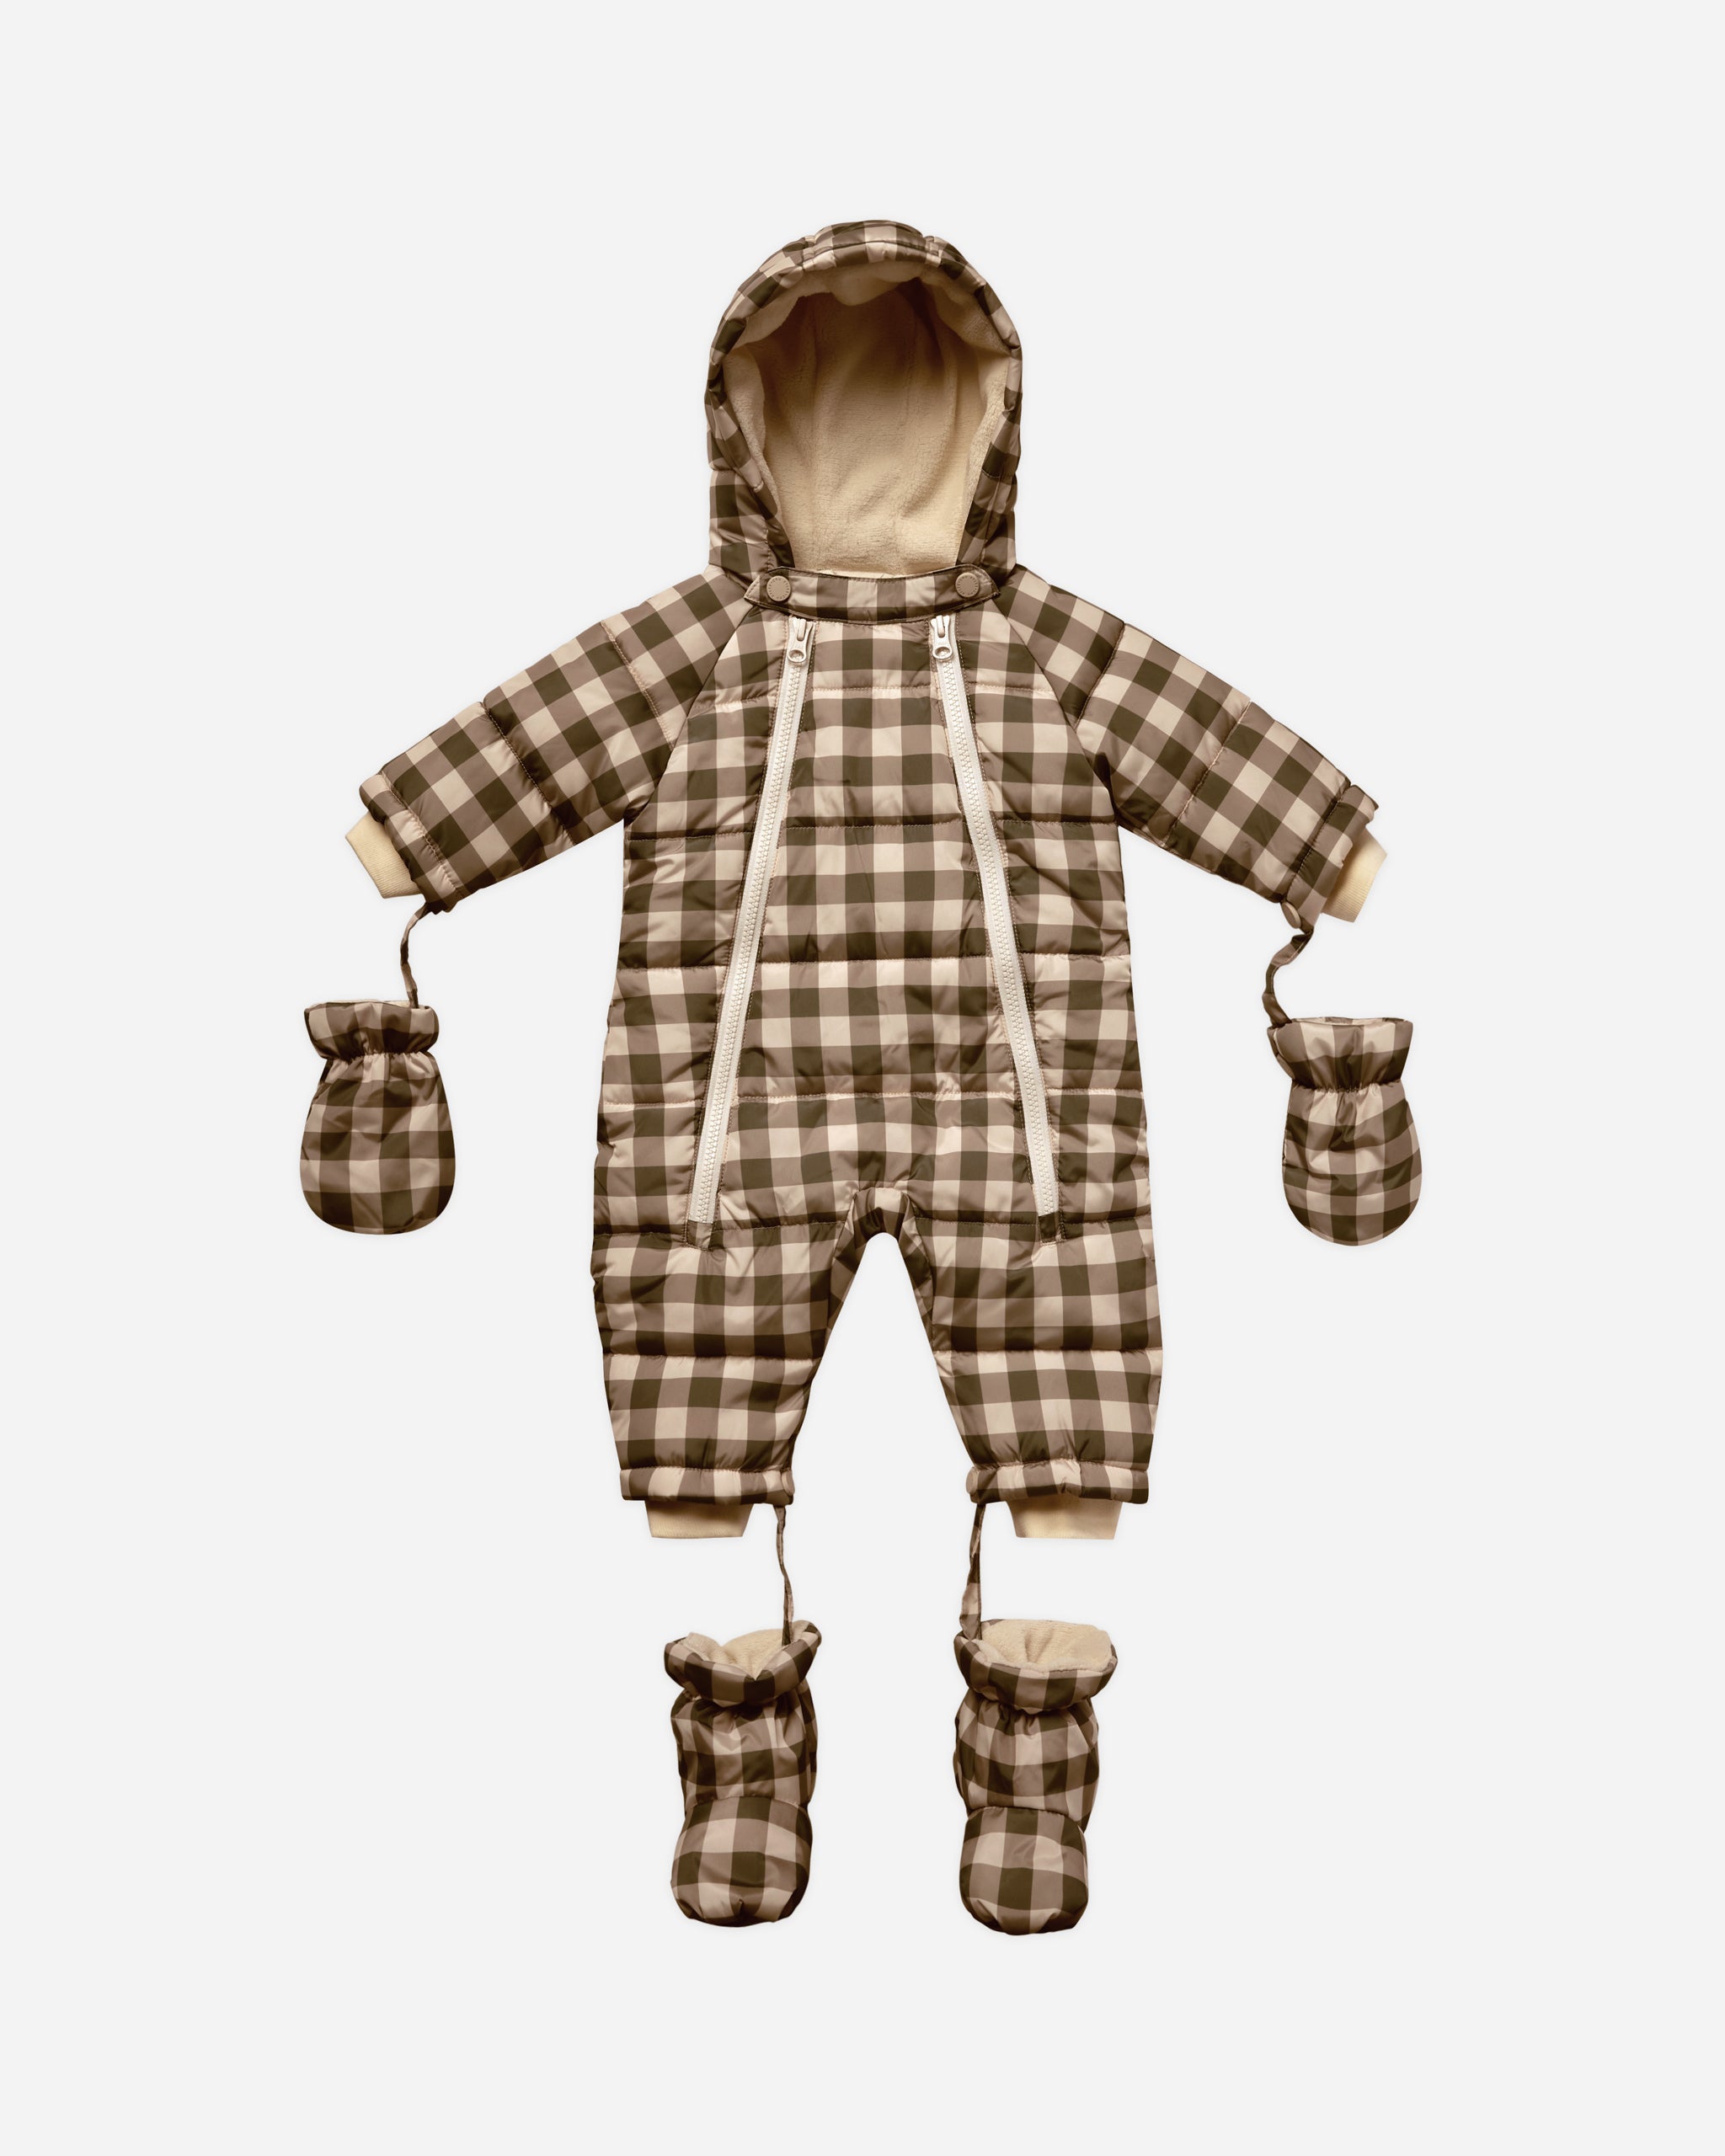 Snow Puffer Suit || Charcoal Check - Rylee + Cru | Kids Clothes | Trendy Baby Clothes | Modern Infant Outfits |